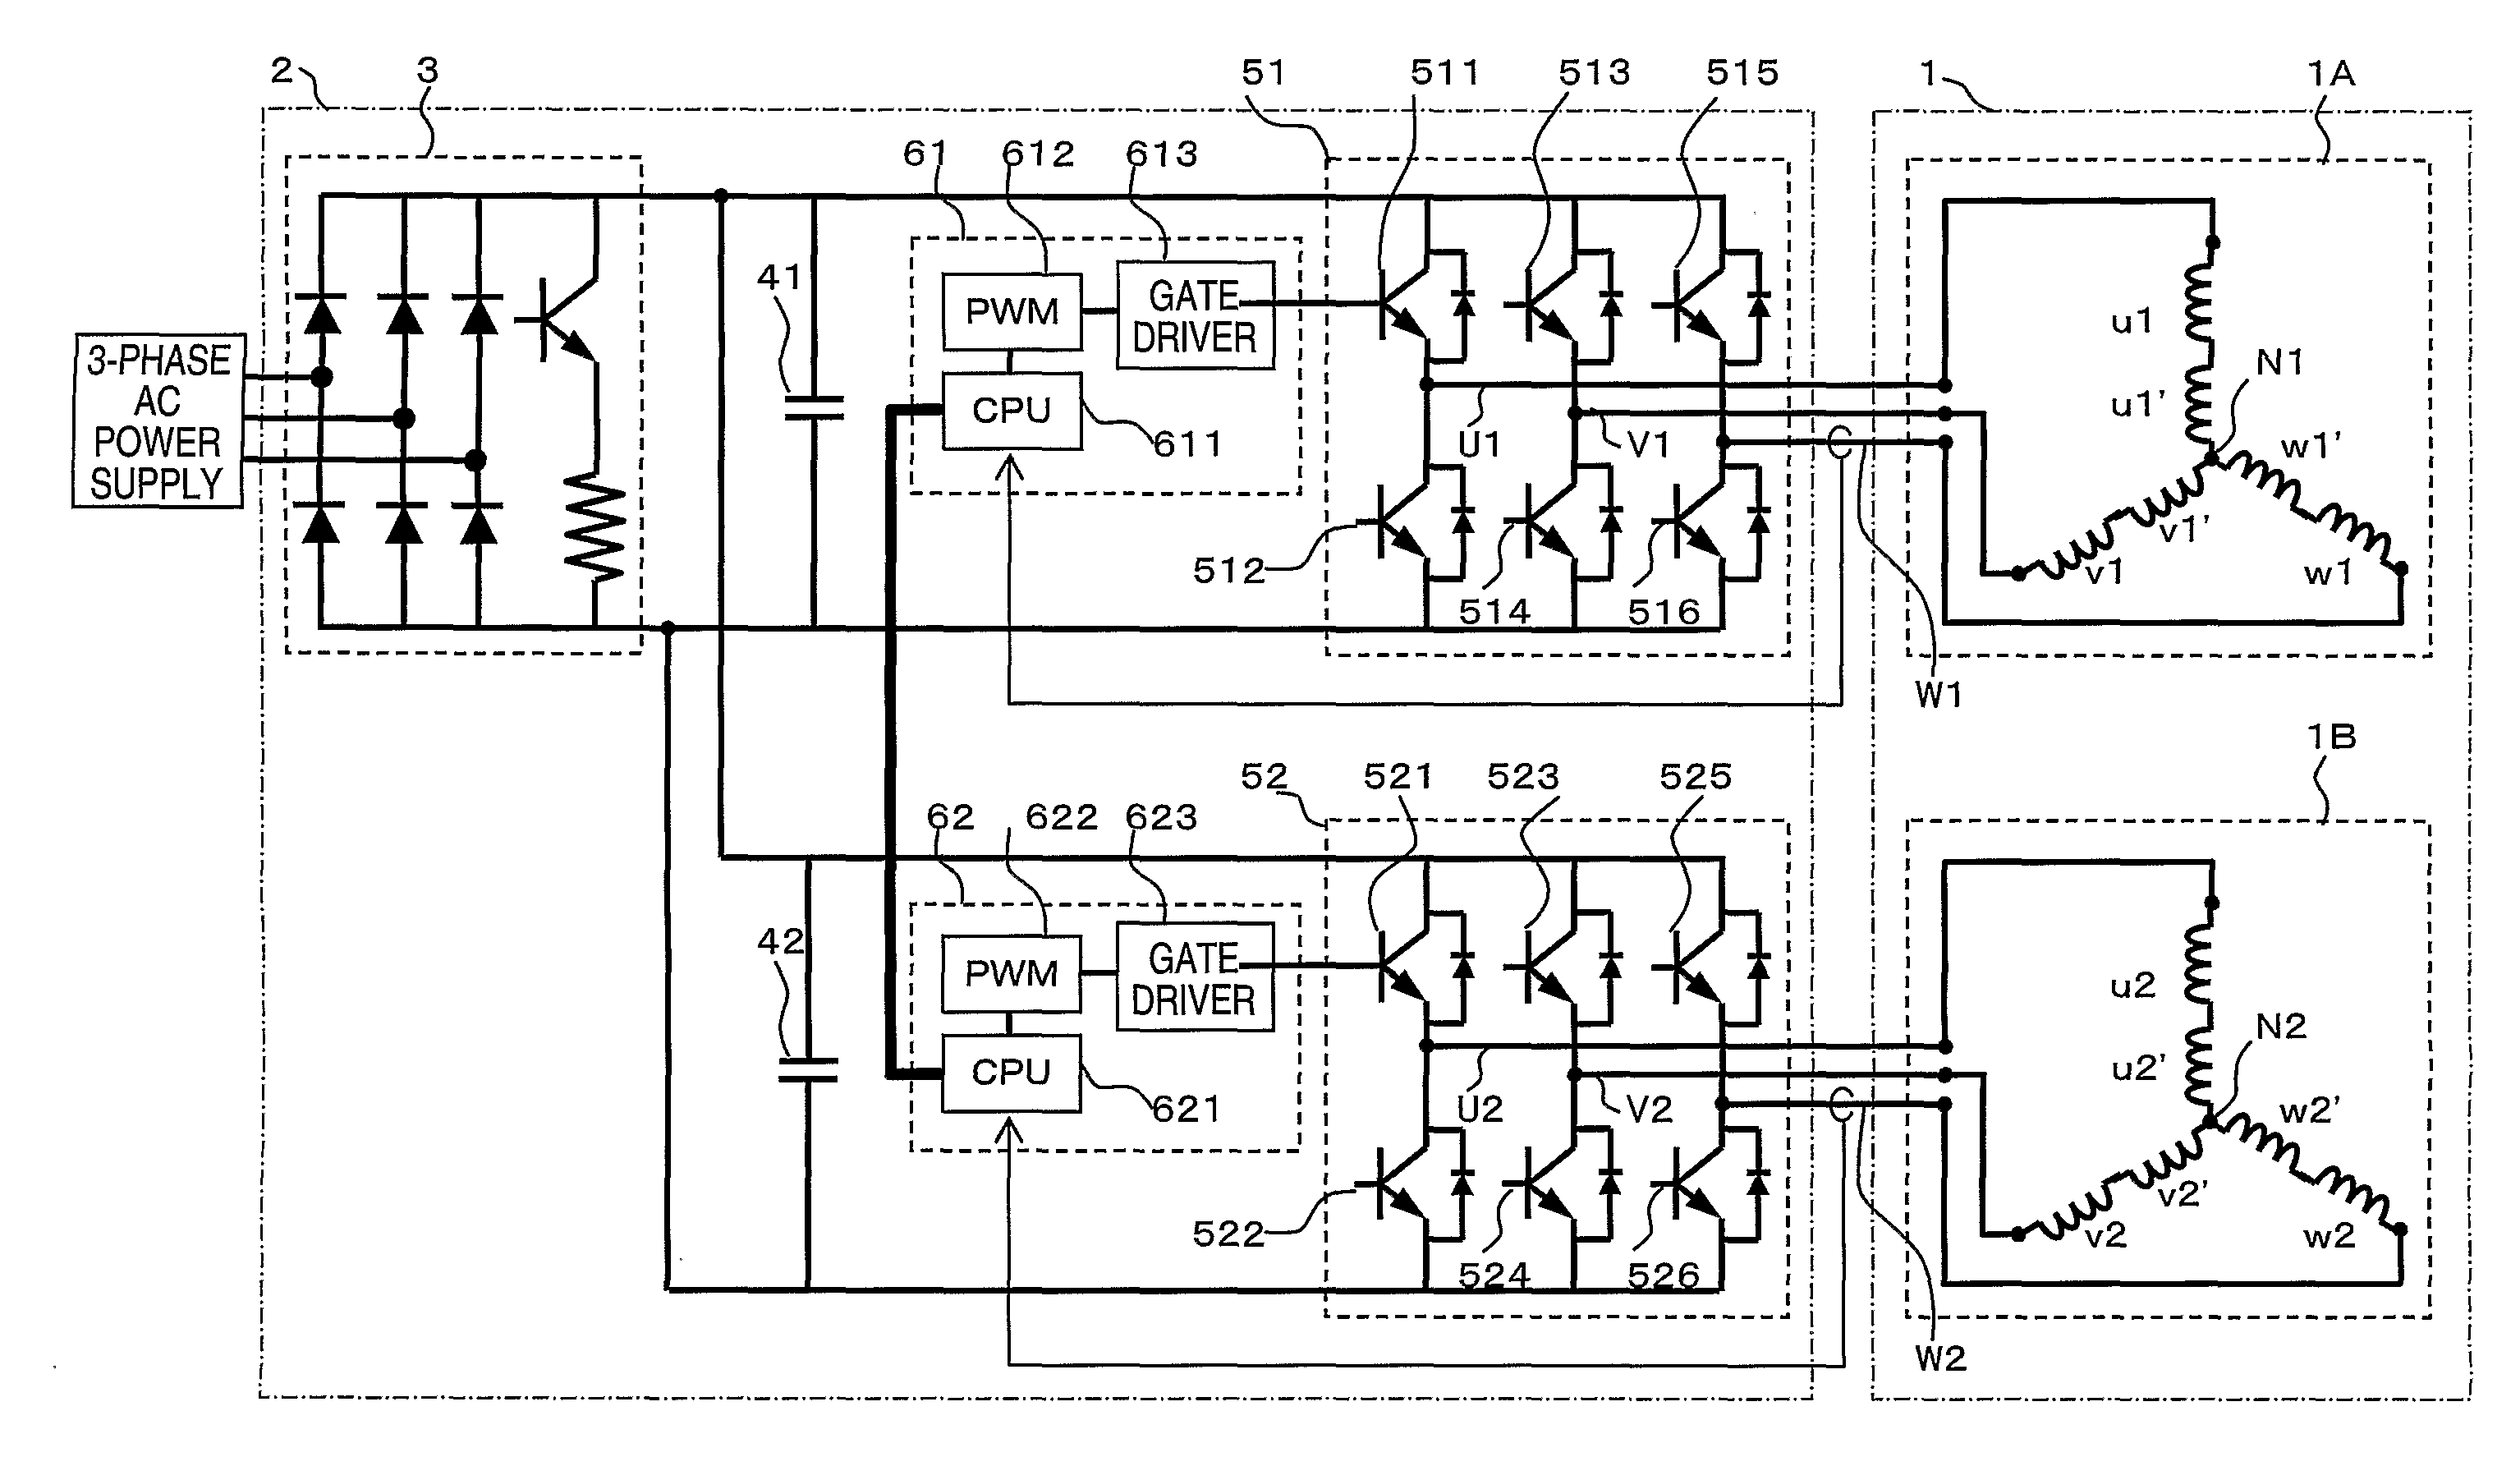 Electric motor system